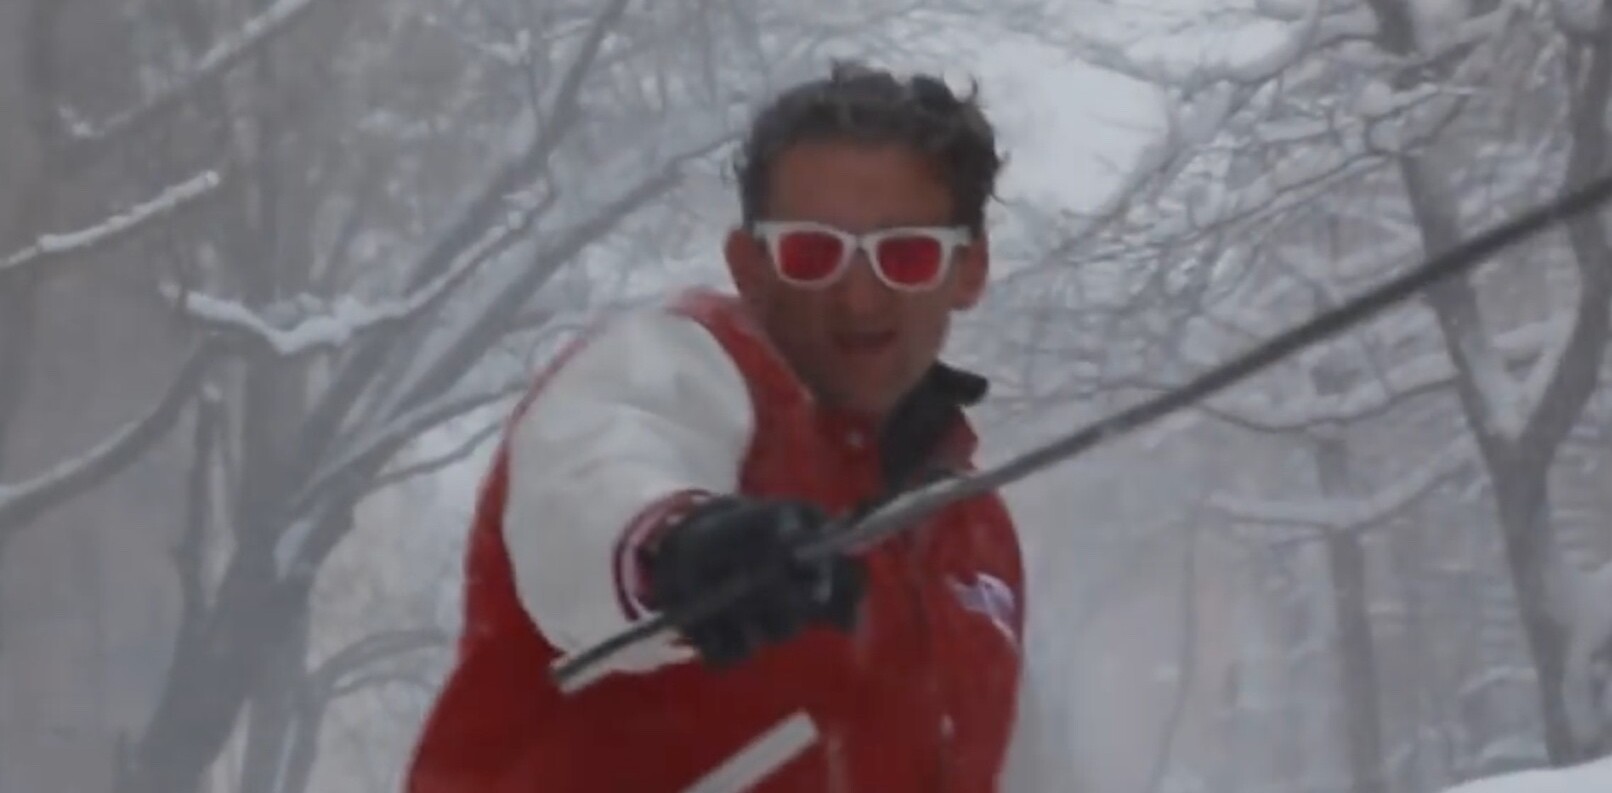 Casey Neistat snowboards with the NYPD and goes viral… again